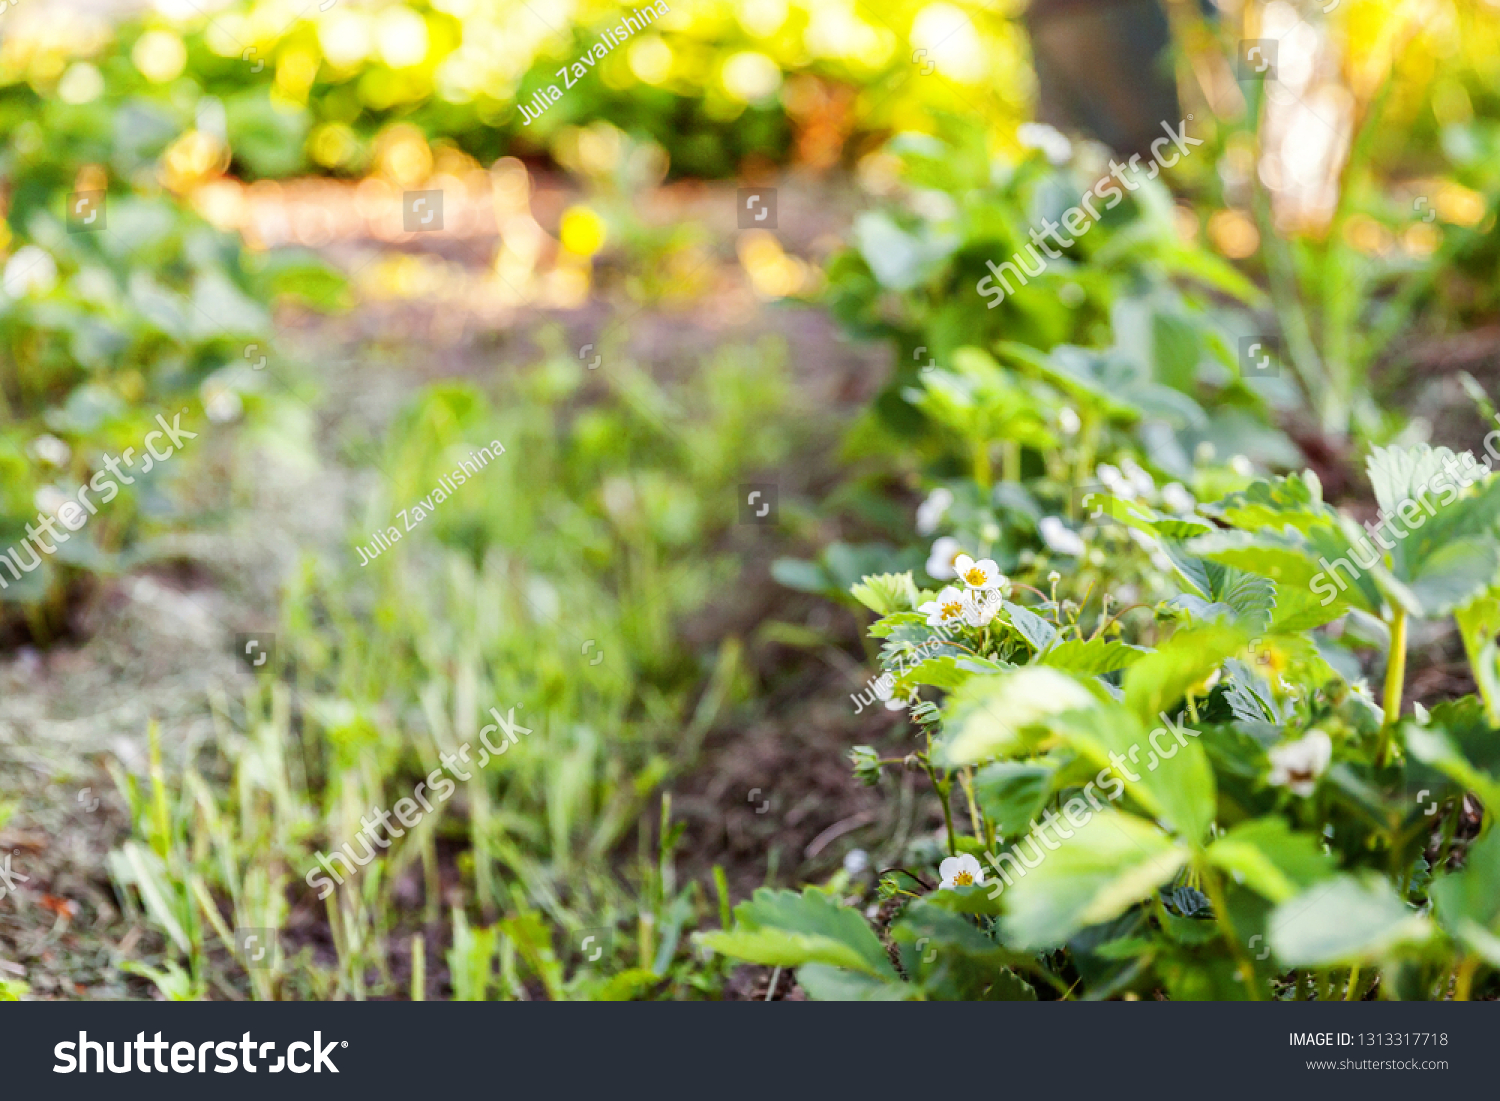 Industrial cultivation of strawberries. Bush of strawberry with flower in spring or summer garden bed. Natural growing of berries on farm. Eco healthy organic food horticulture concept background #1313317718